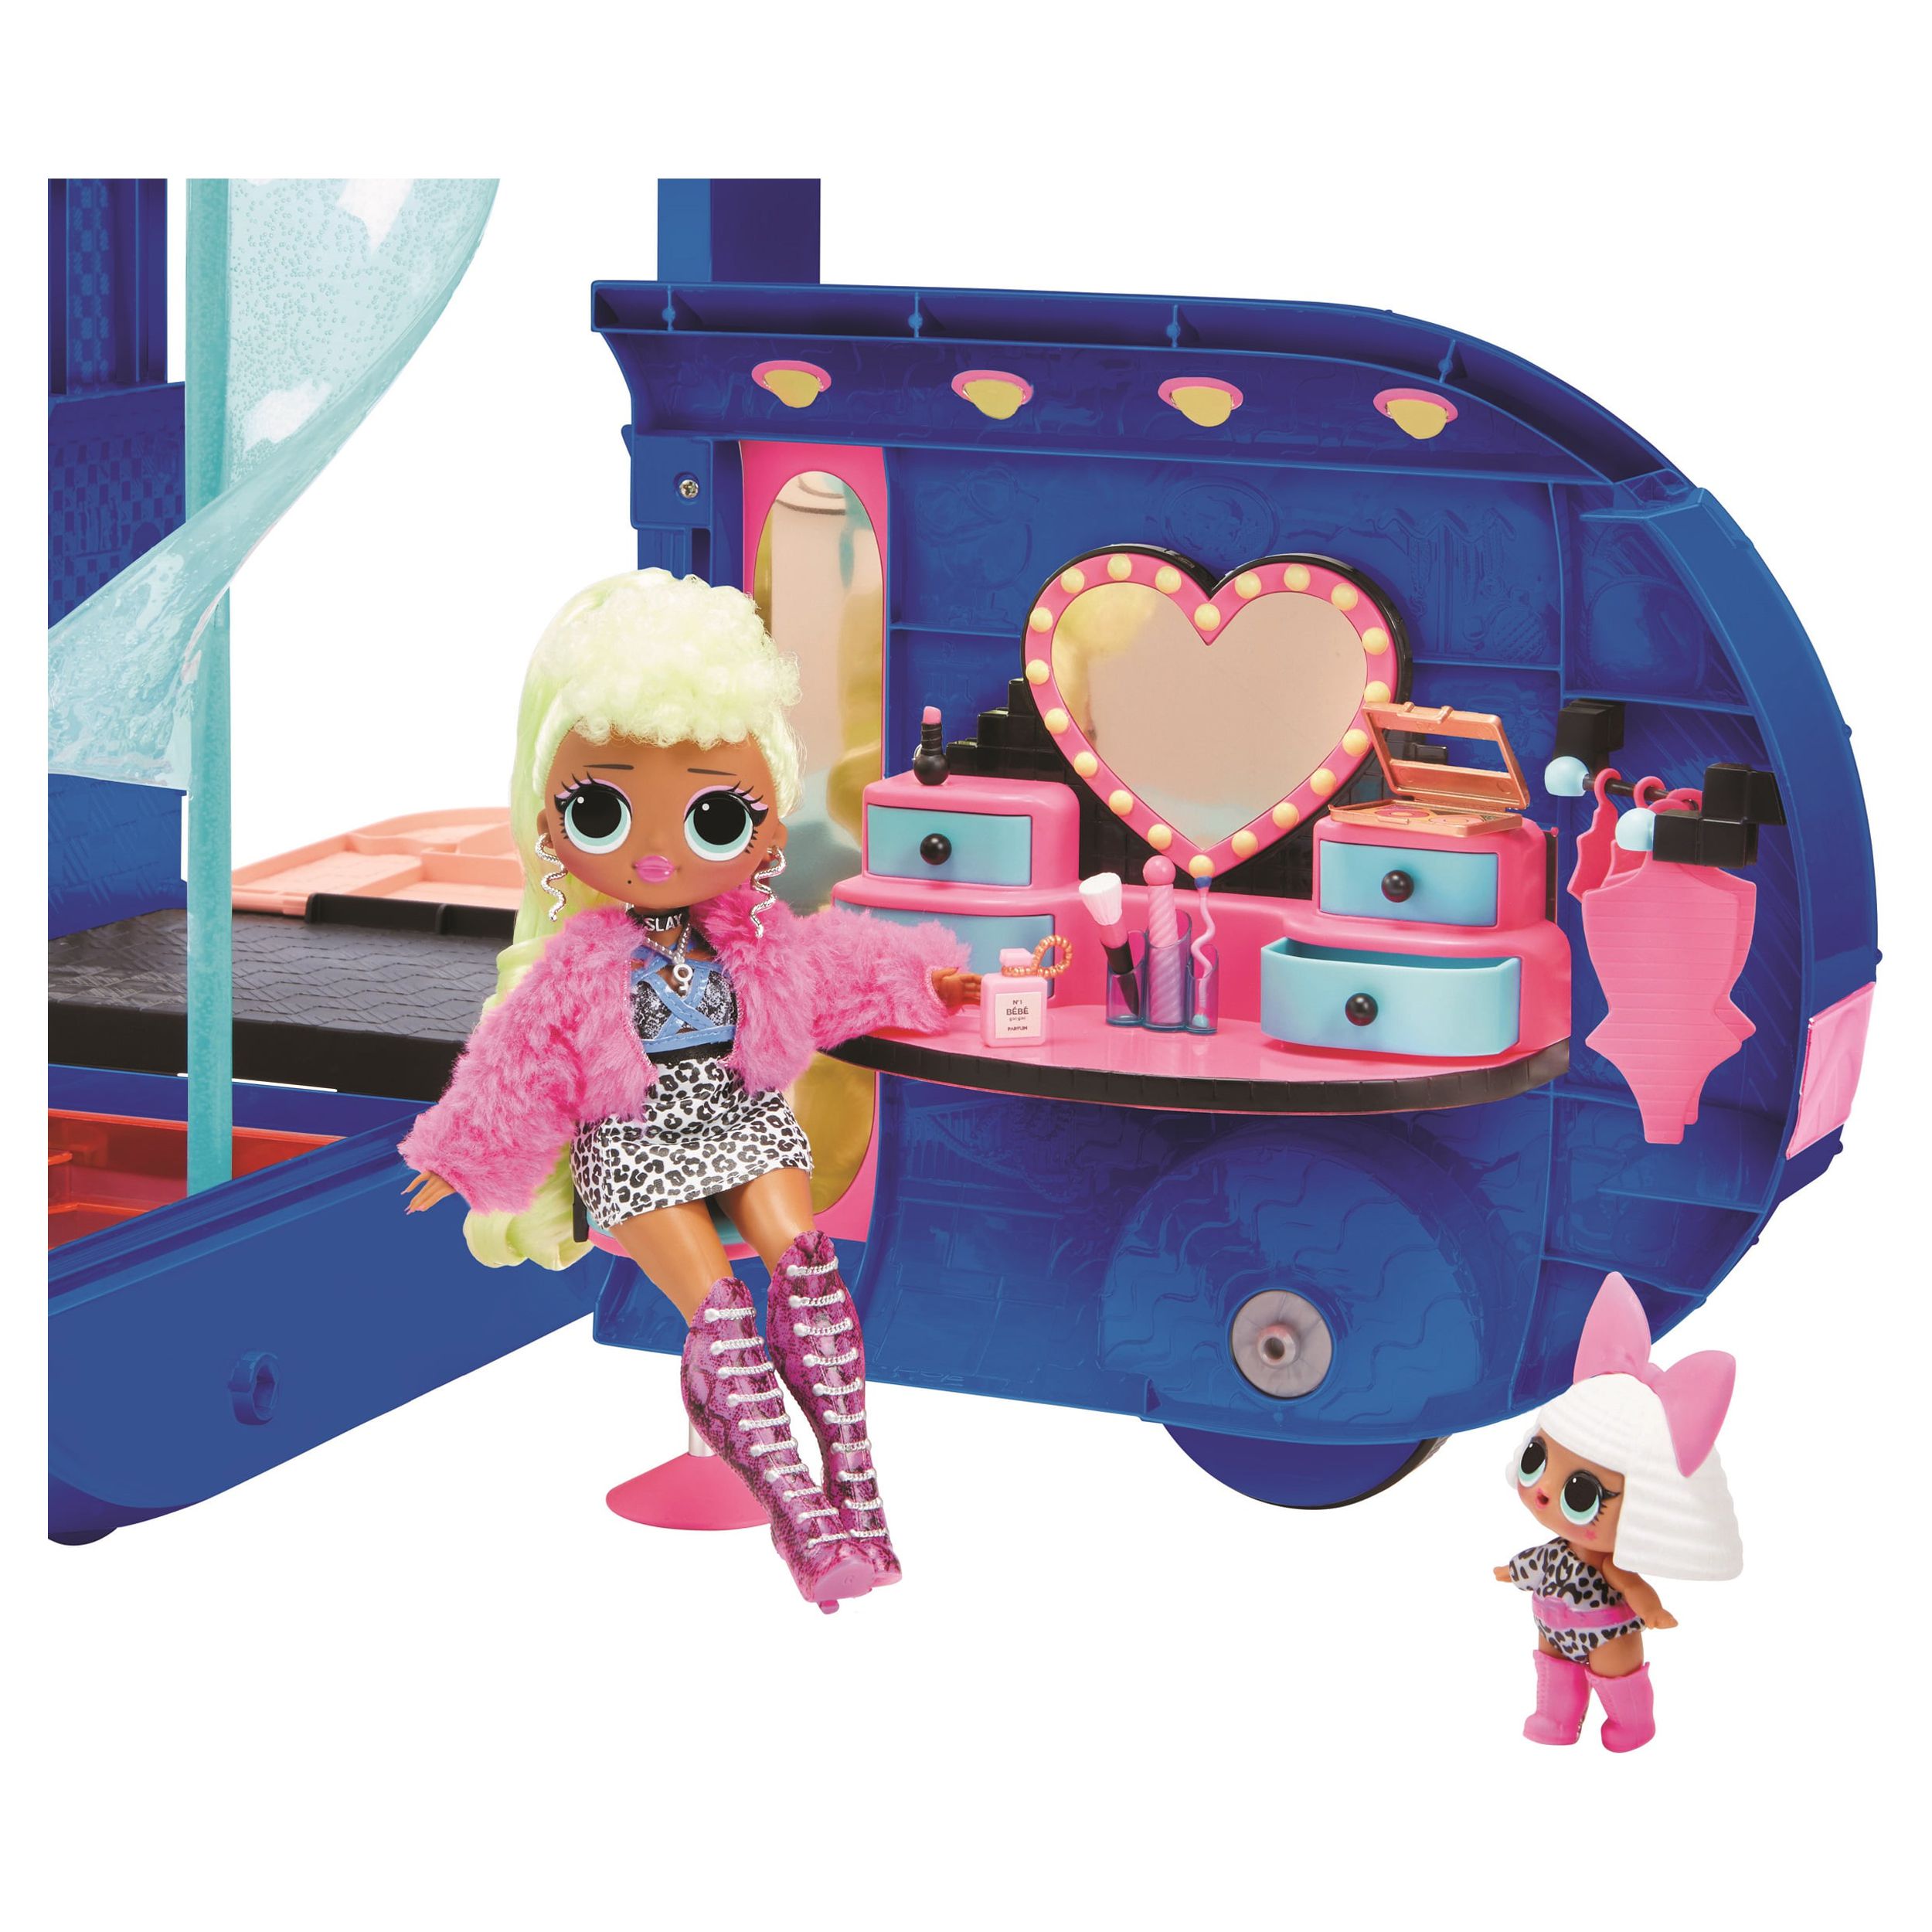 L.O.L. Surprise! O.M.G. 4-in-1 Glamper Fashion Camper with 55+ Surprises (Electric Blue) - image 3 of 4